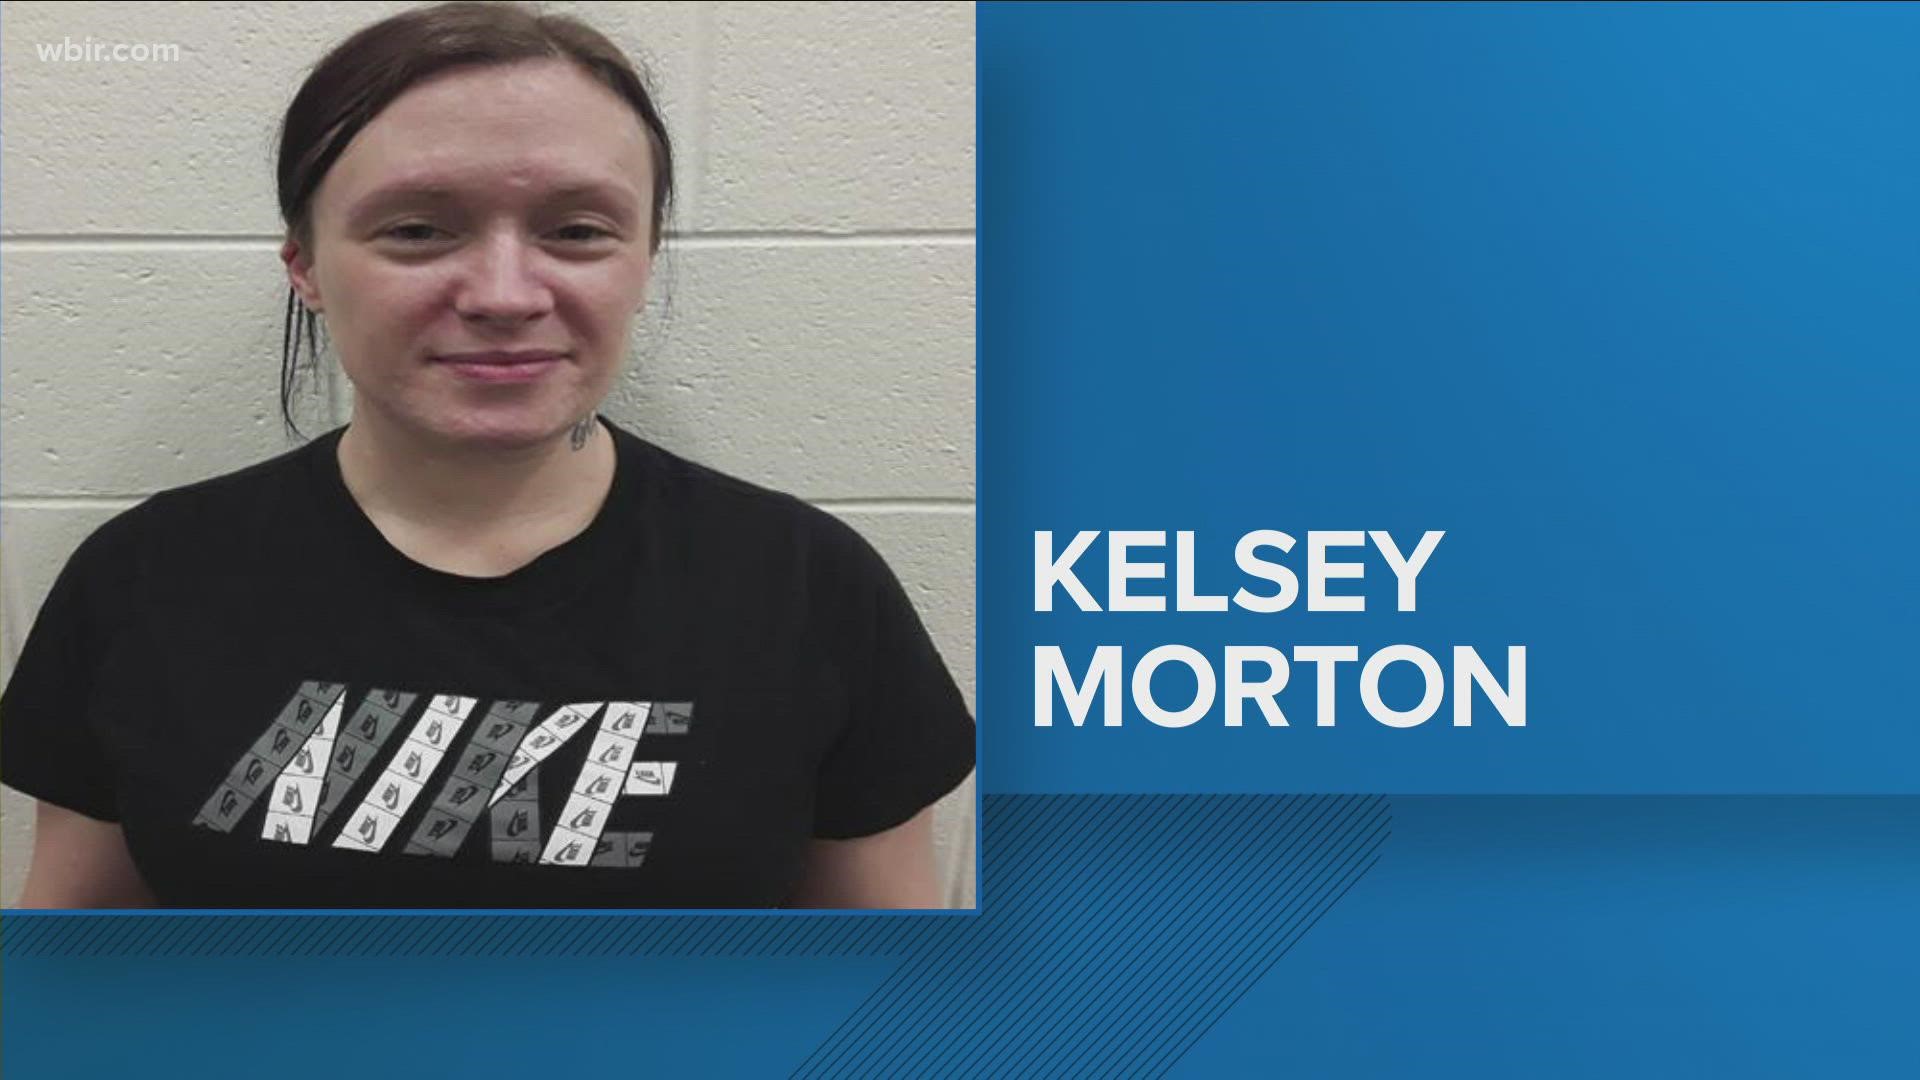 Kelsey Morton is charged with identity theft among other charges after her sister, Jerrica Morton, was charged with Kelsey's offenses.